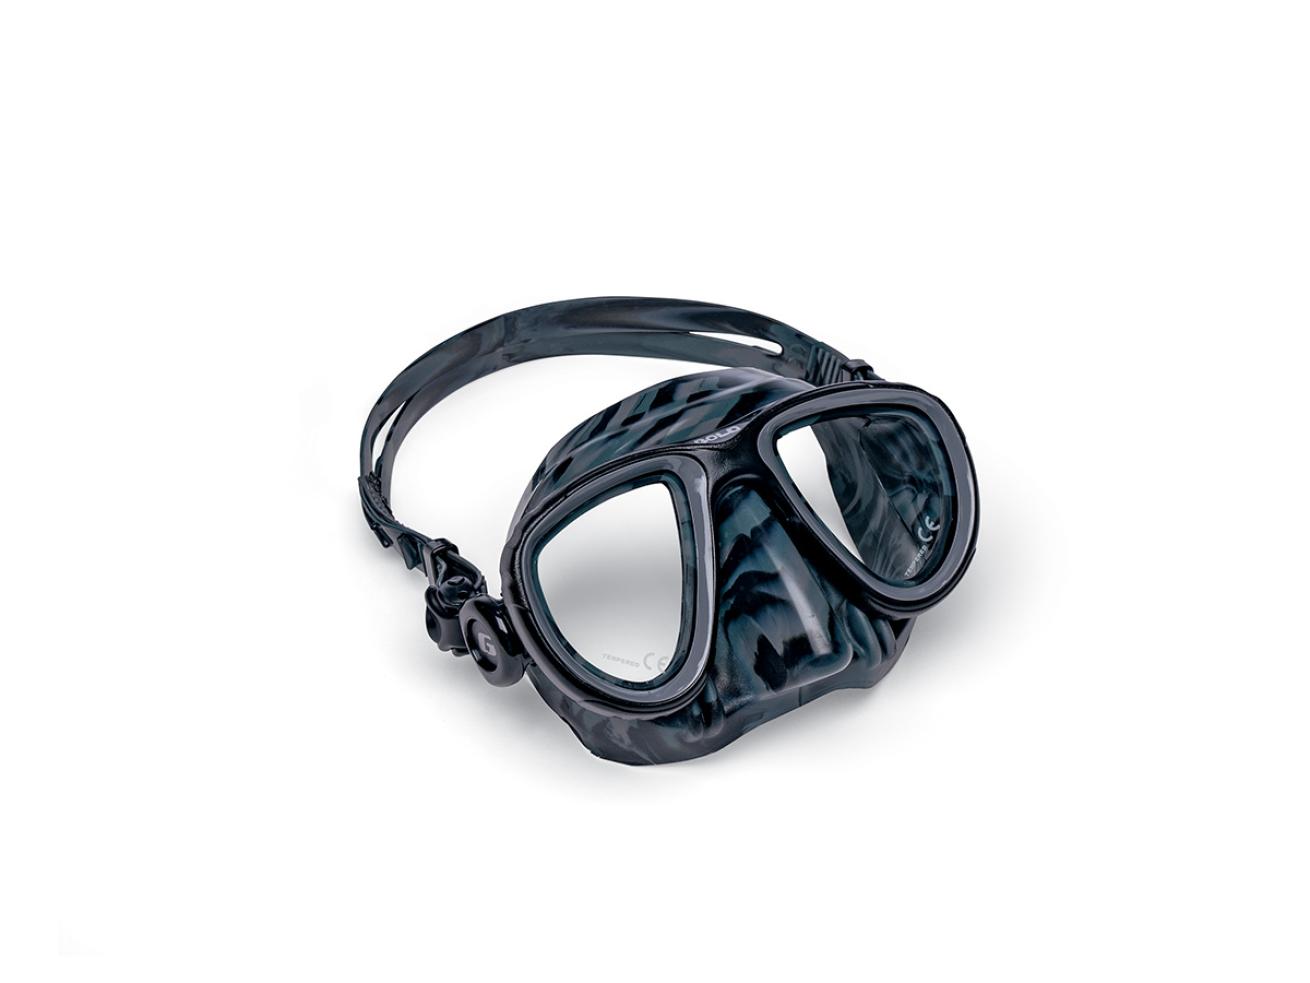 Amphibian Scuba - Travis the turtle's product of the week! Dive into  unparalleled clarity with the Atomic Venom Frameless Mask! Elevate your  underwater adventures with this masterpiece of design and technology. Here's